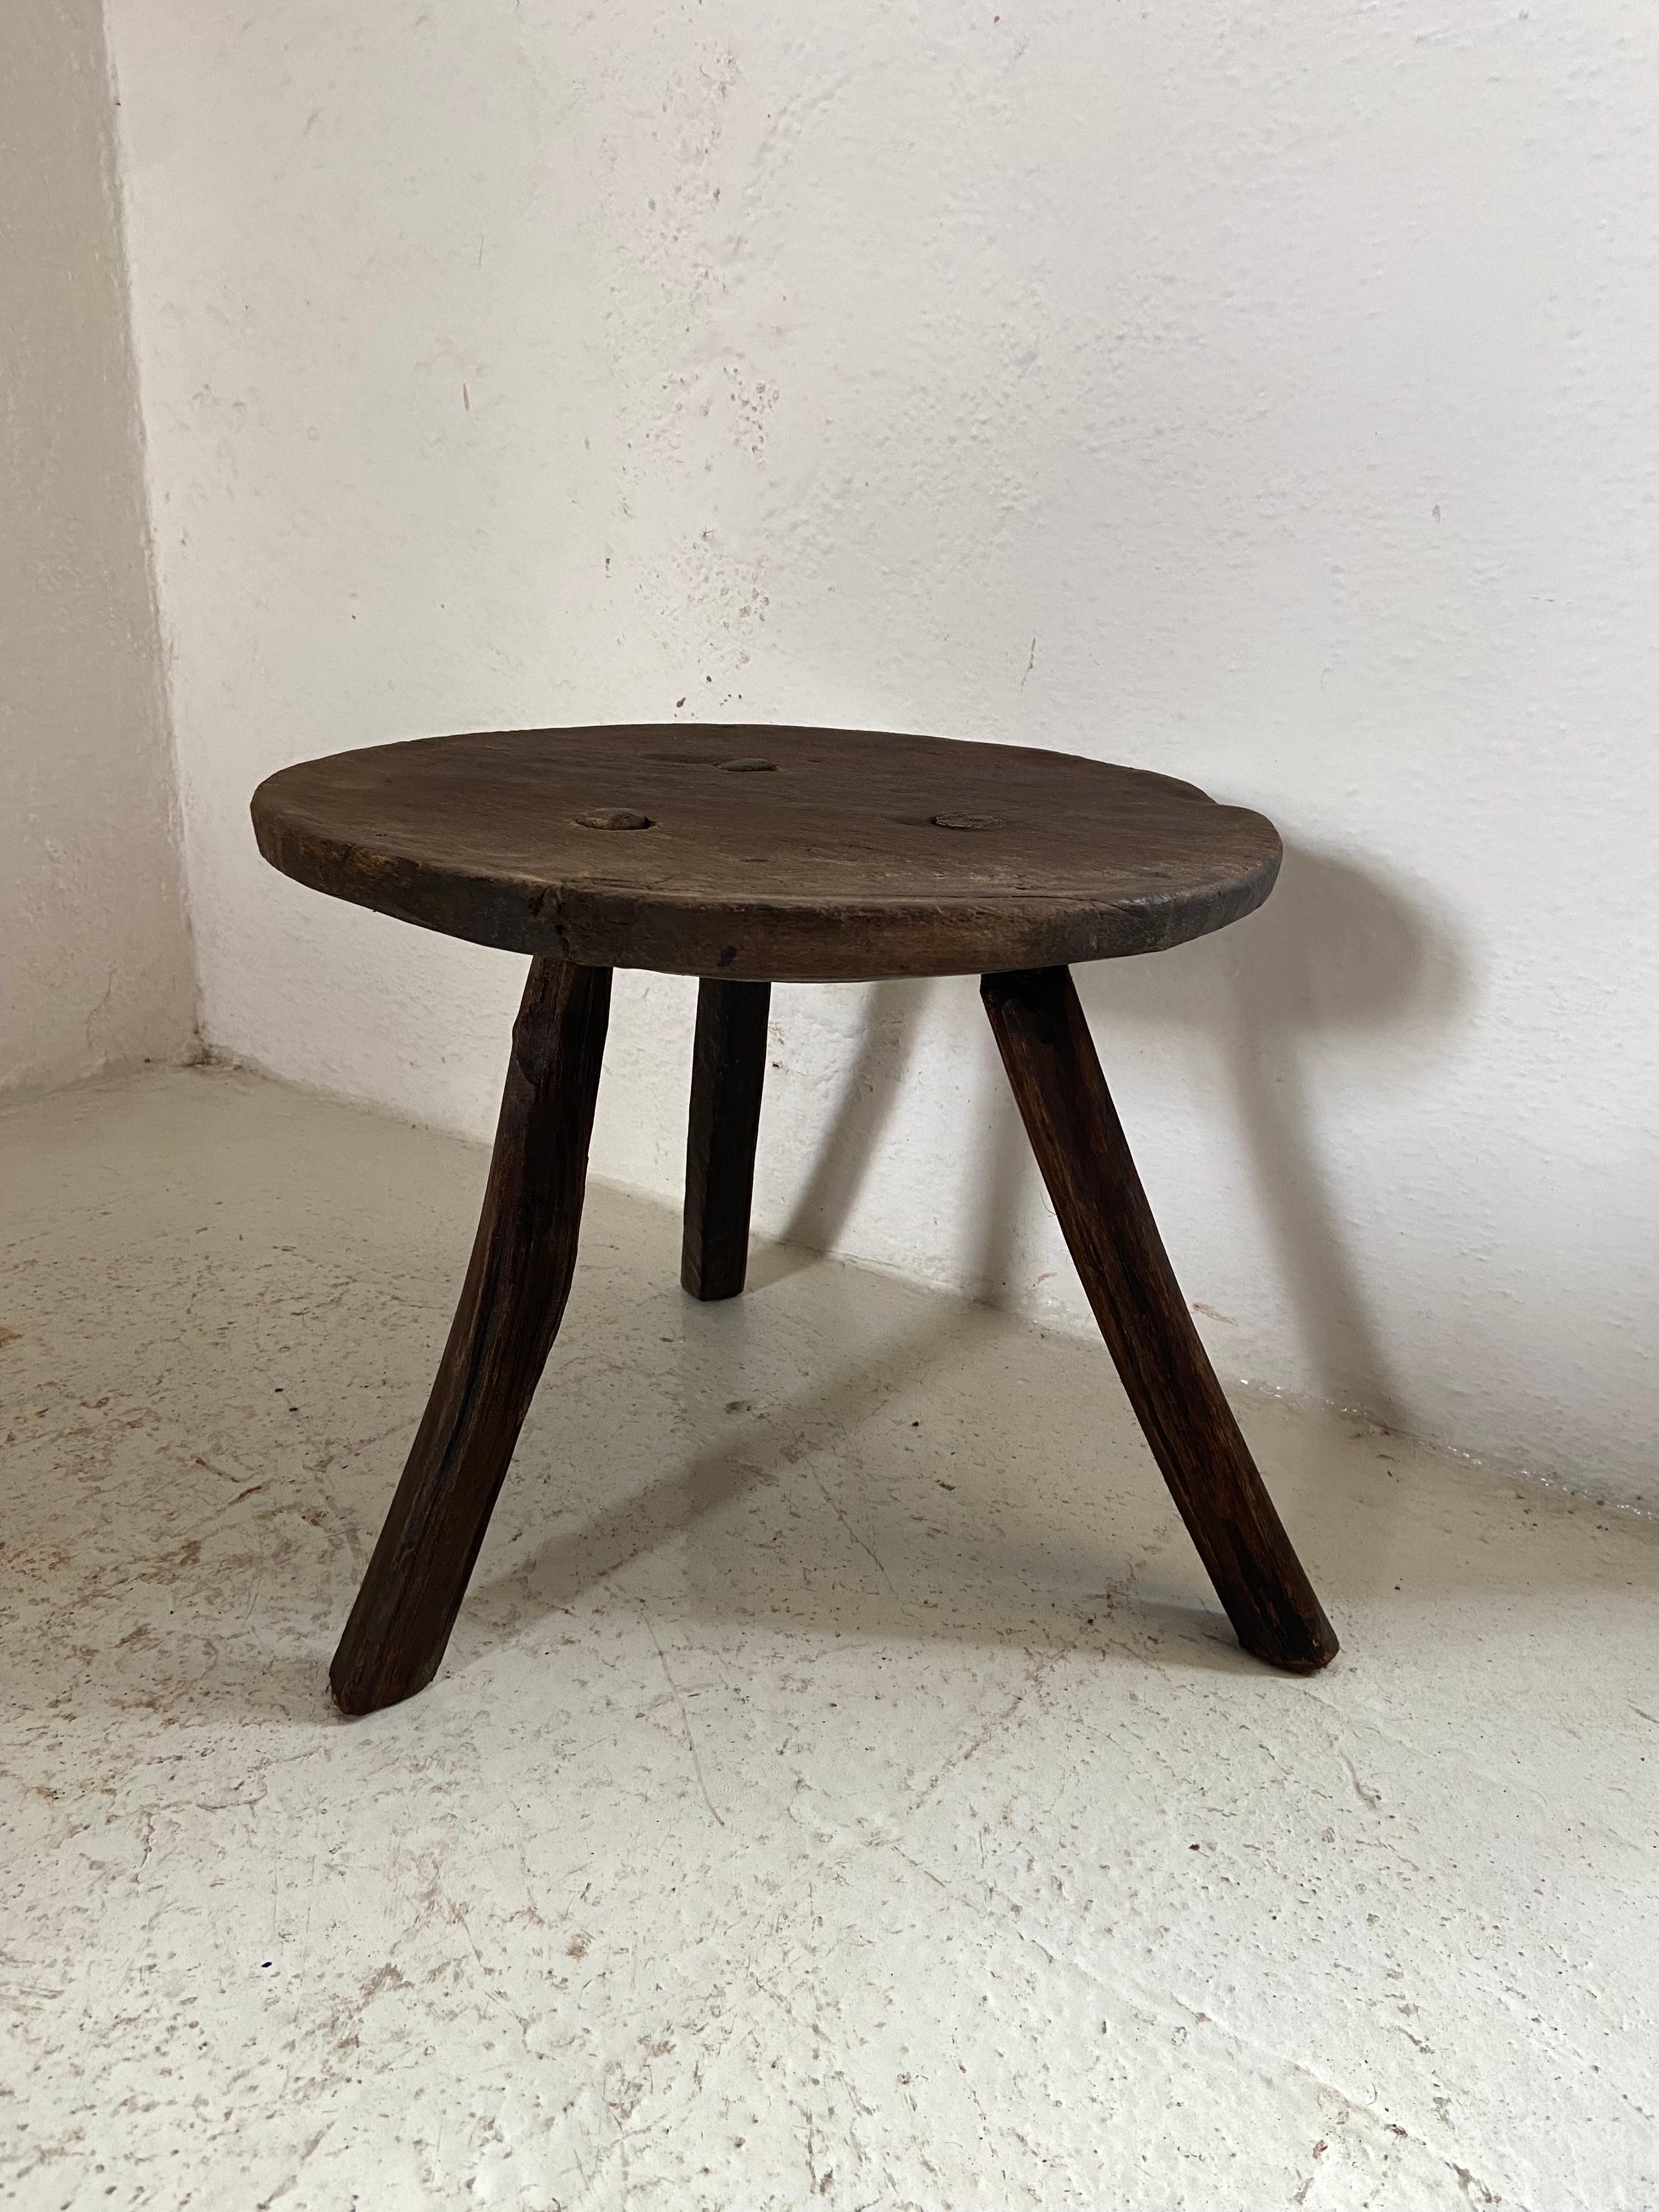 Mexican Mid-20th Century Hardwood Stool from Mexico